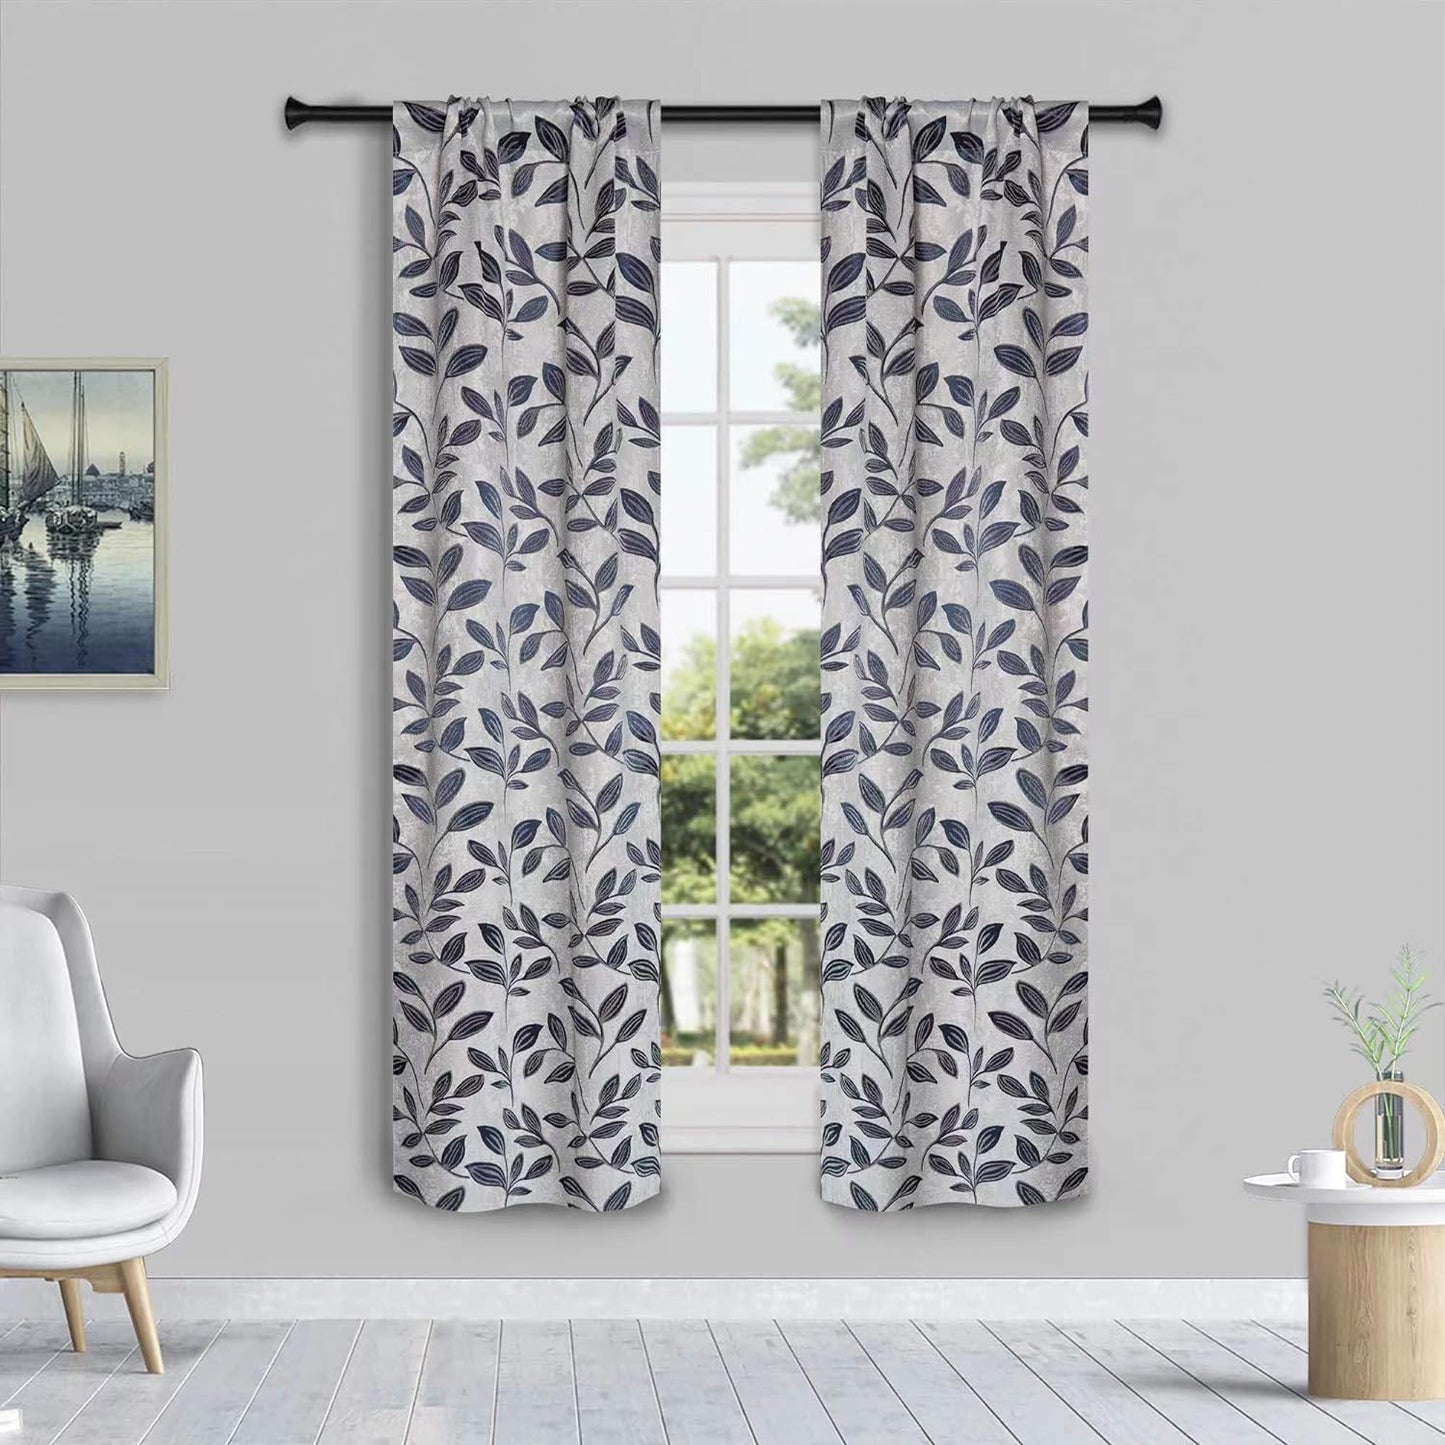 Superior Blackout Curtains, Room Darkening Window Accent for Bedroom, Sun Blocking, Thermal, Modern Bohemian Curtains, Leaves Collection, Set of 2 Panels, Rod Pocket - 52 in X 63 In, Nickel Black  Home City Inc. White-Navy Blue 26 In X 63 In (W X L) 